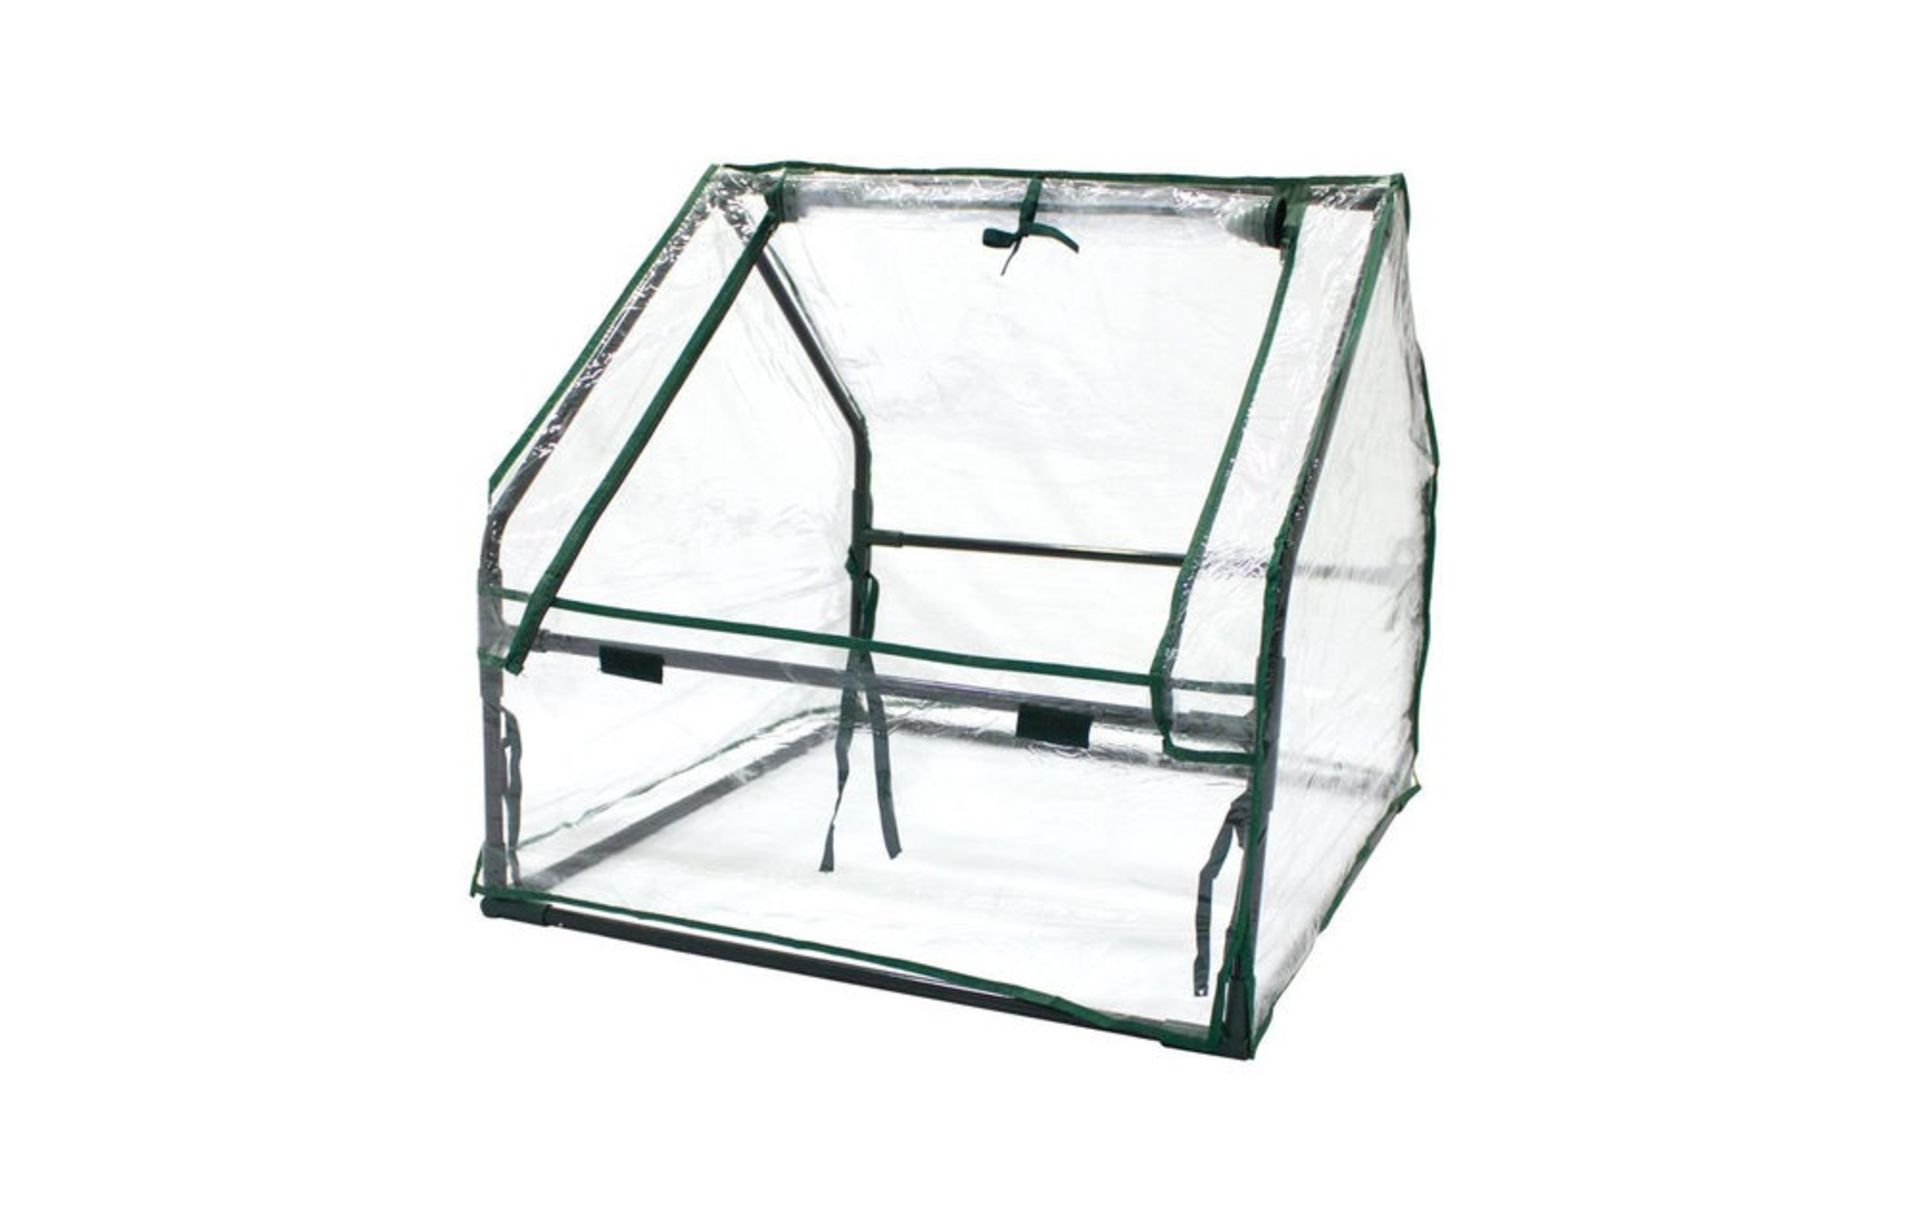 V *TRADE QTY* Brand New Propagation Greenhouse 67x76x60cm With Removable Cover X 3 YOUR BID PRICE TO